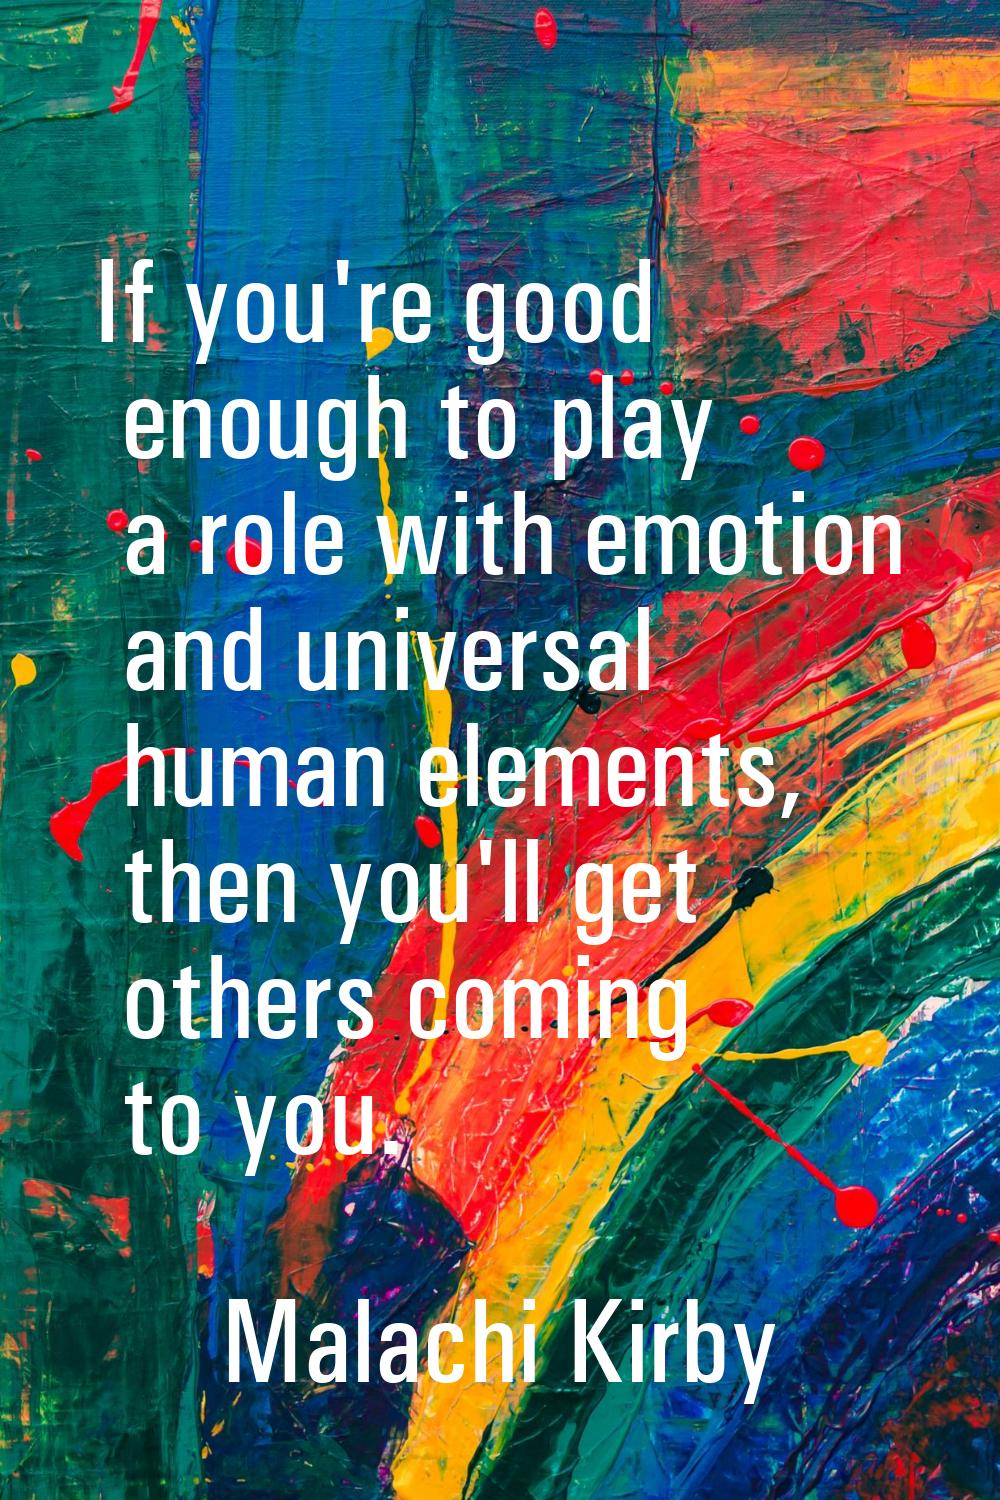 If you're good enough to play a role with emotion and universal human elements, then you'll get oth